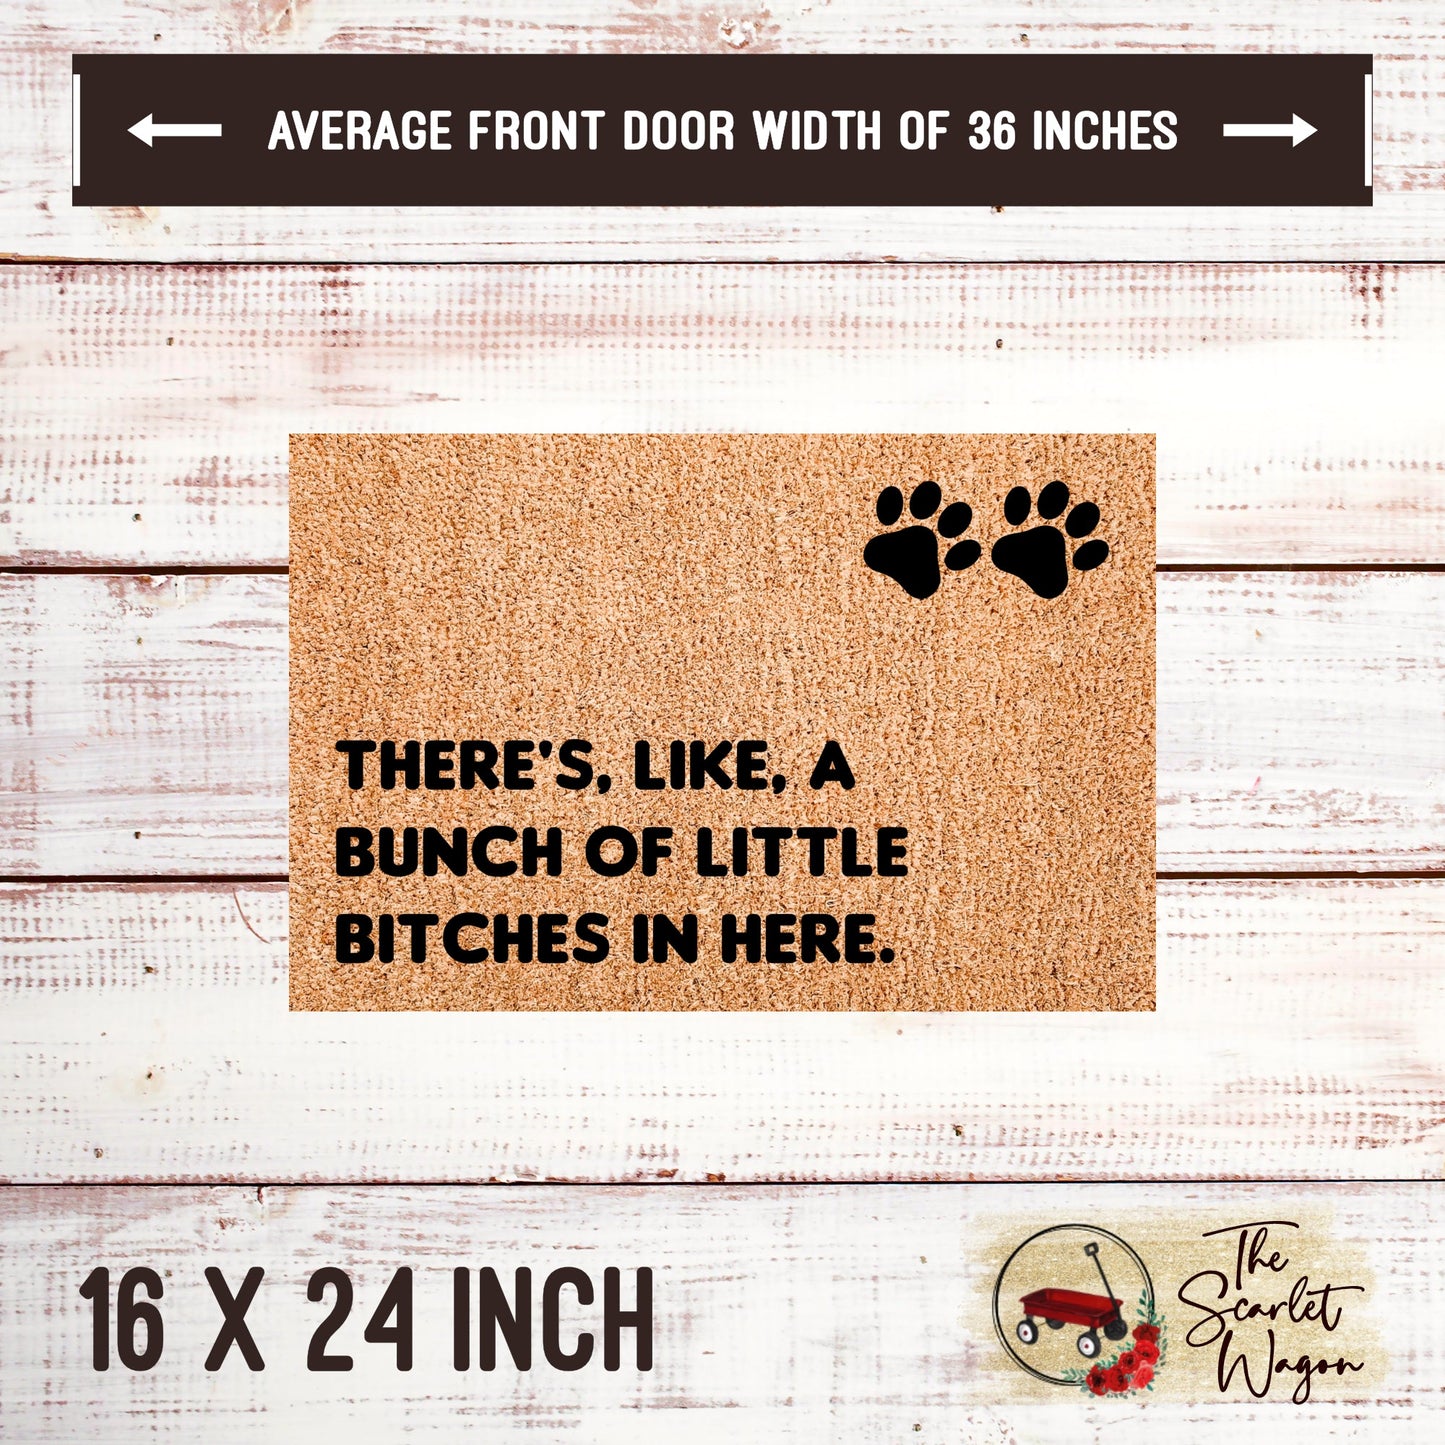 Bunch of Little Bitches in Here Door Mats teelaunch 16x24 Inches (Free Shipping) 